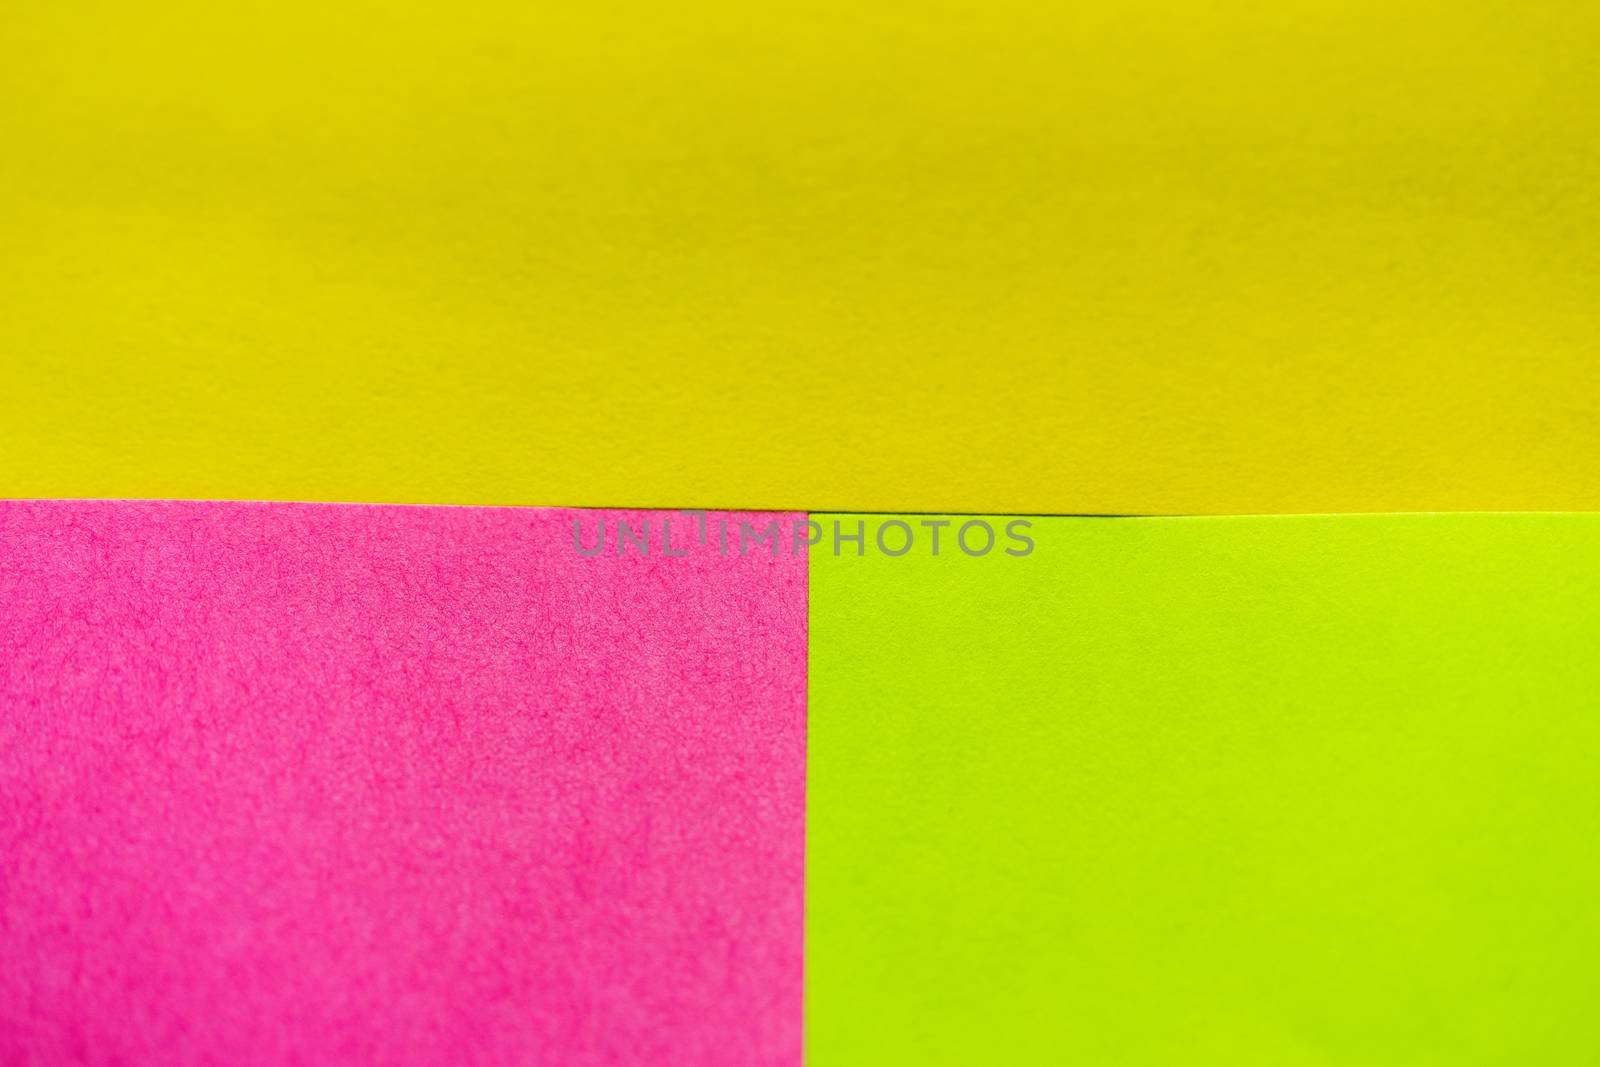 Yellow, green and pink paper pattern arranged in the background by ToonPhotoClub